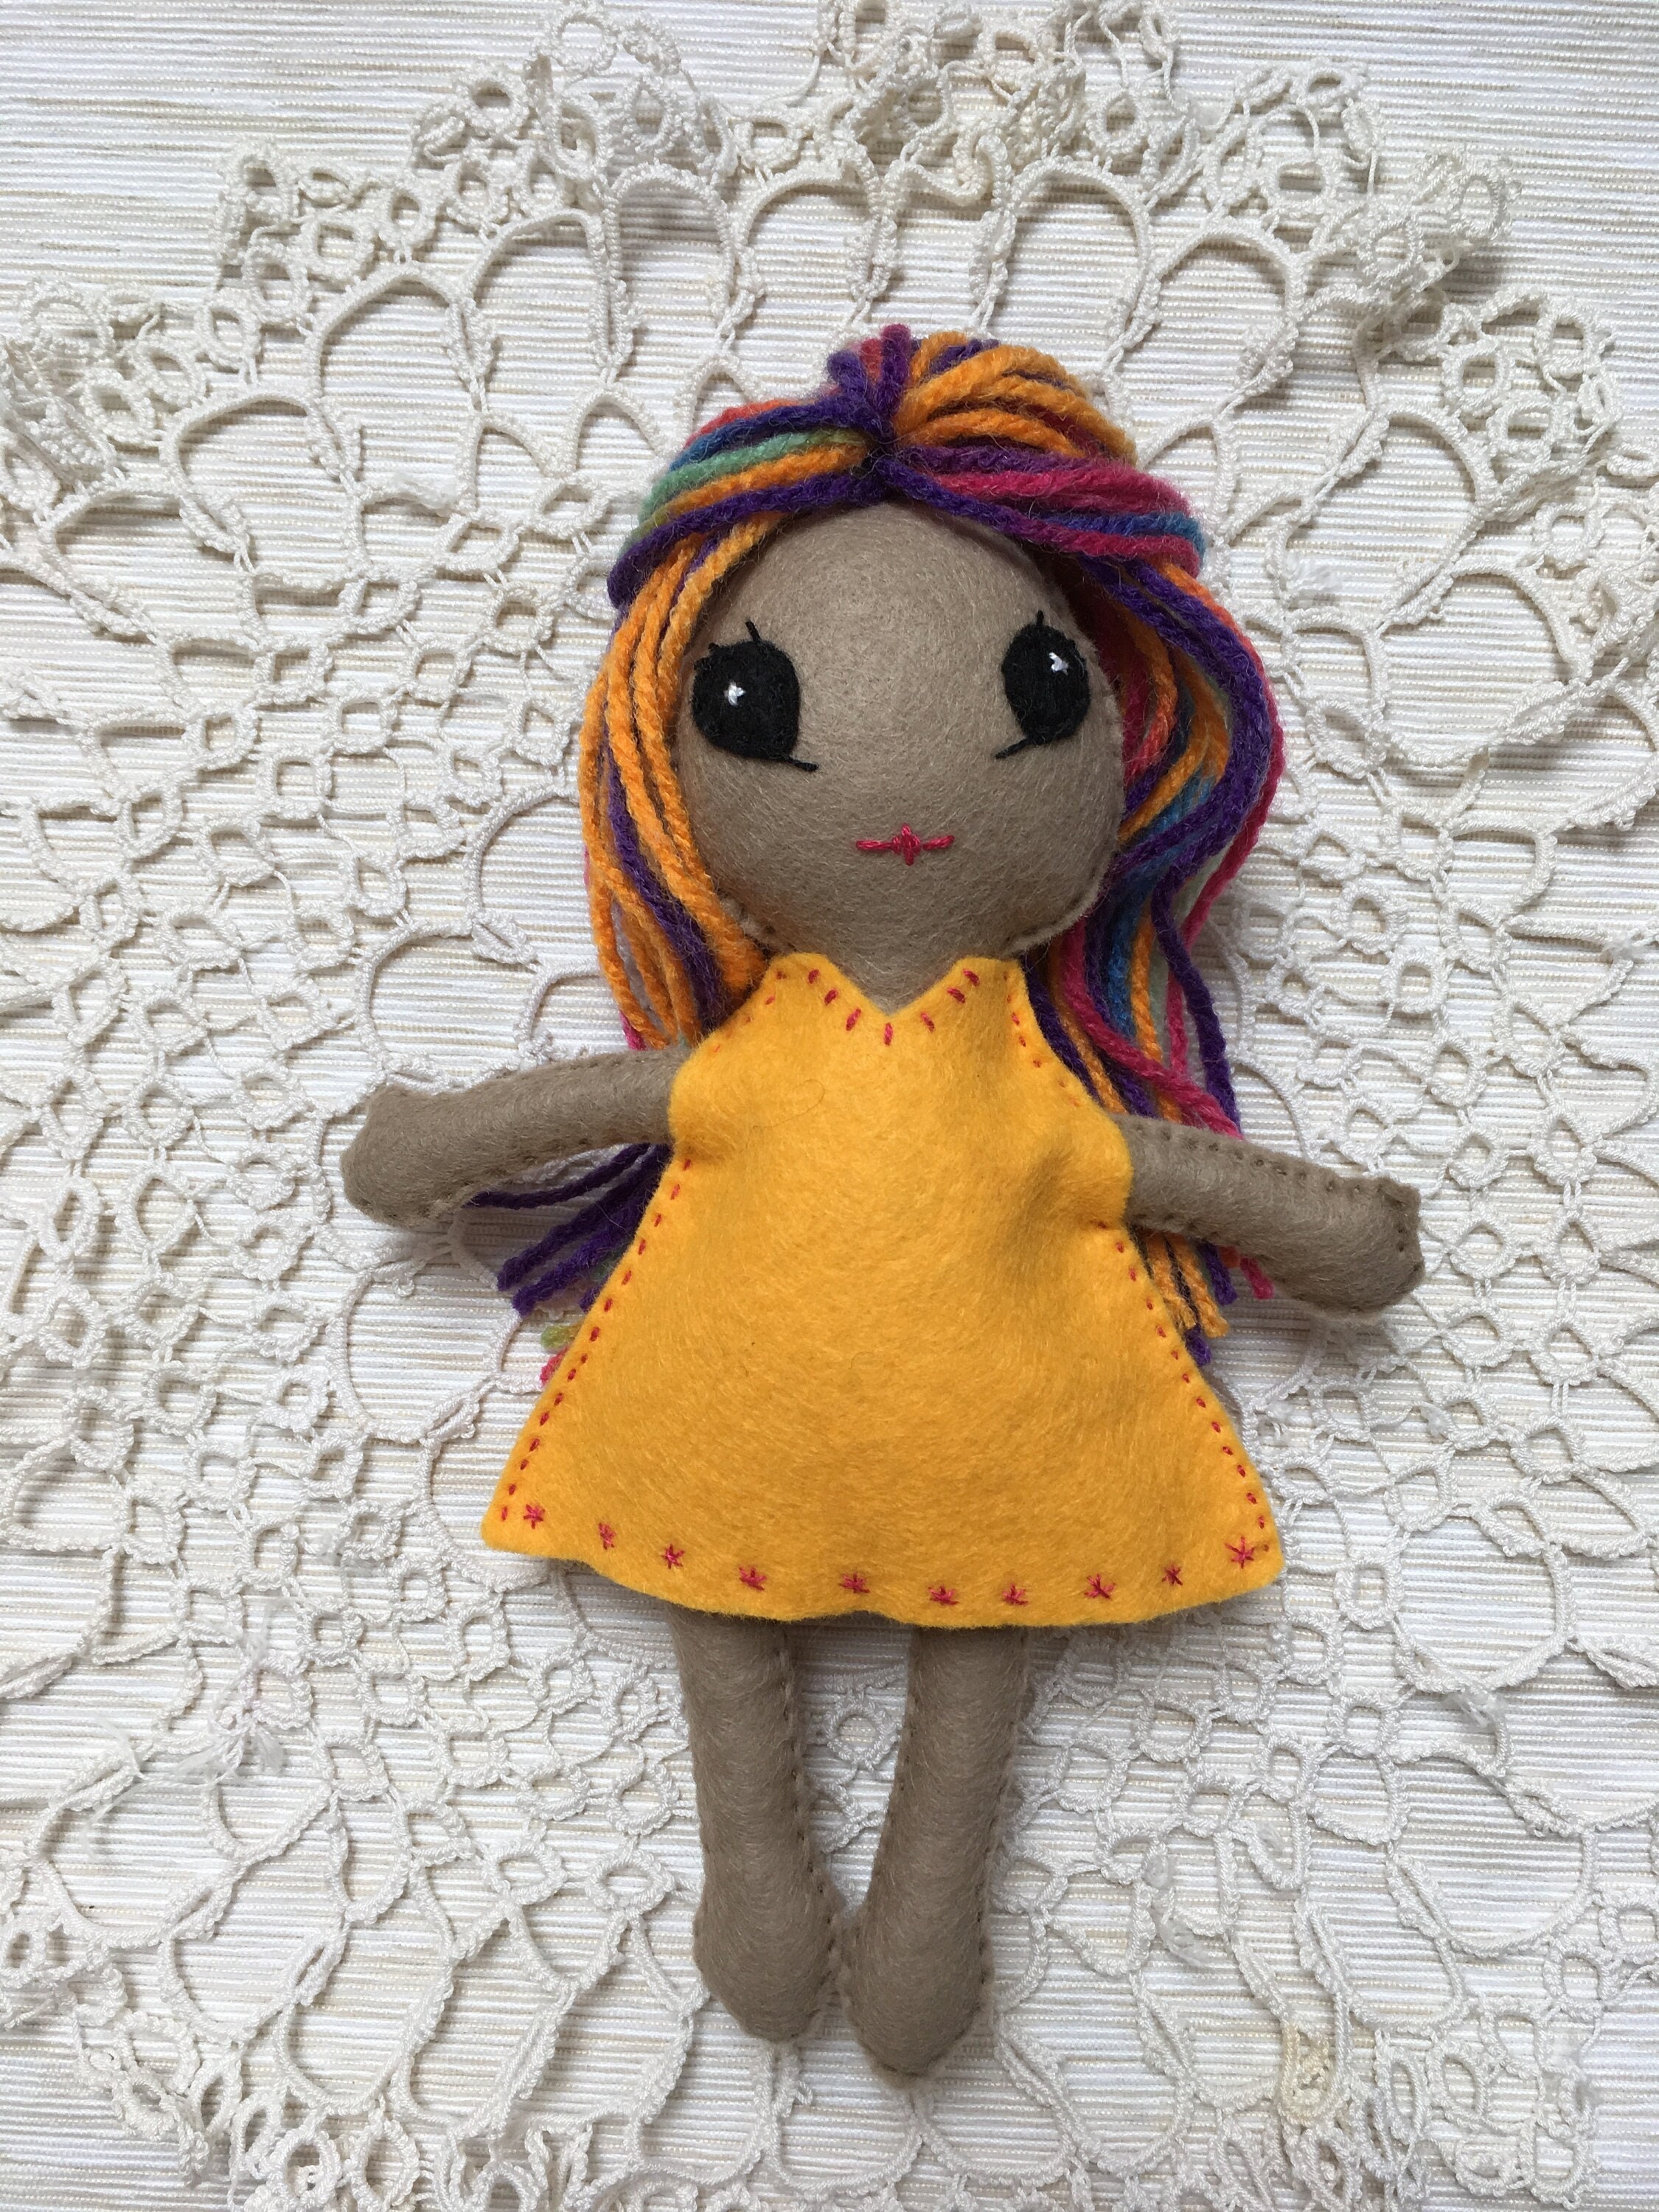 Curly dolls hair: easy doll making tutorial - PepperPot Crafts